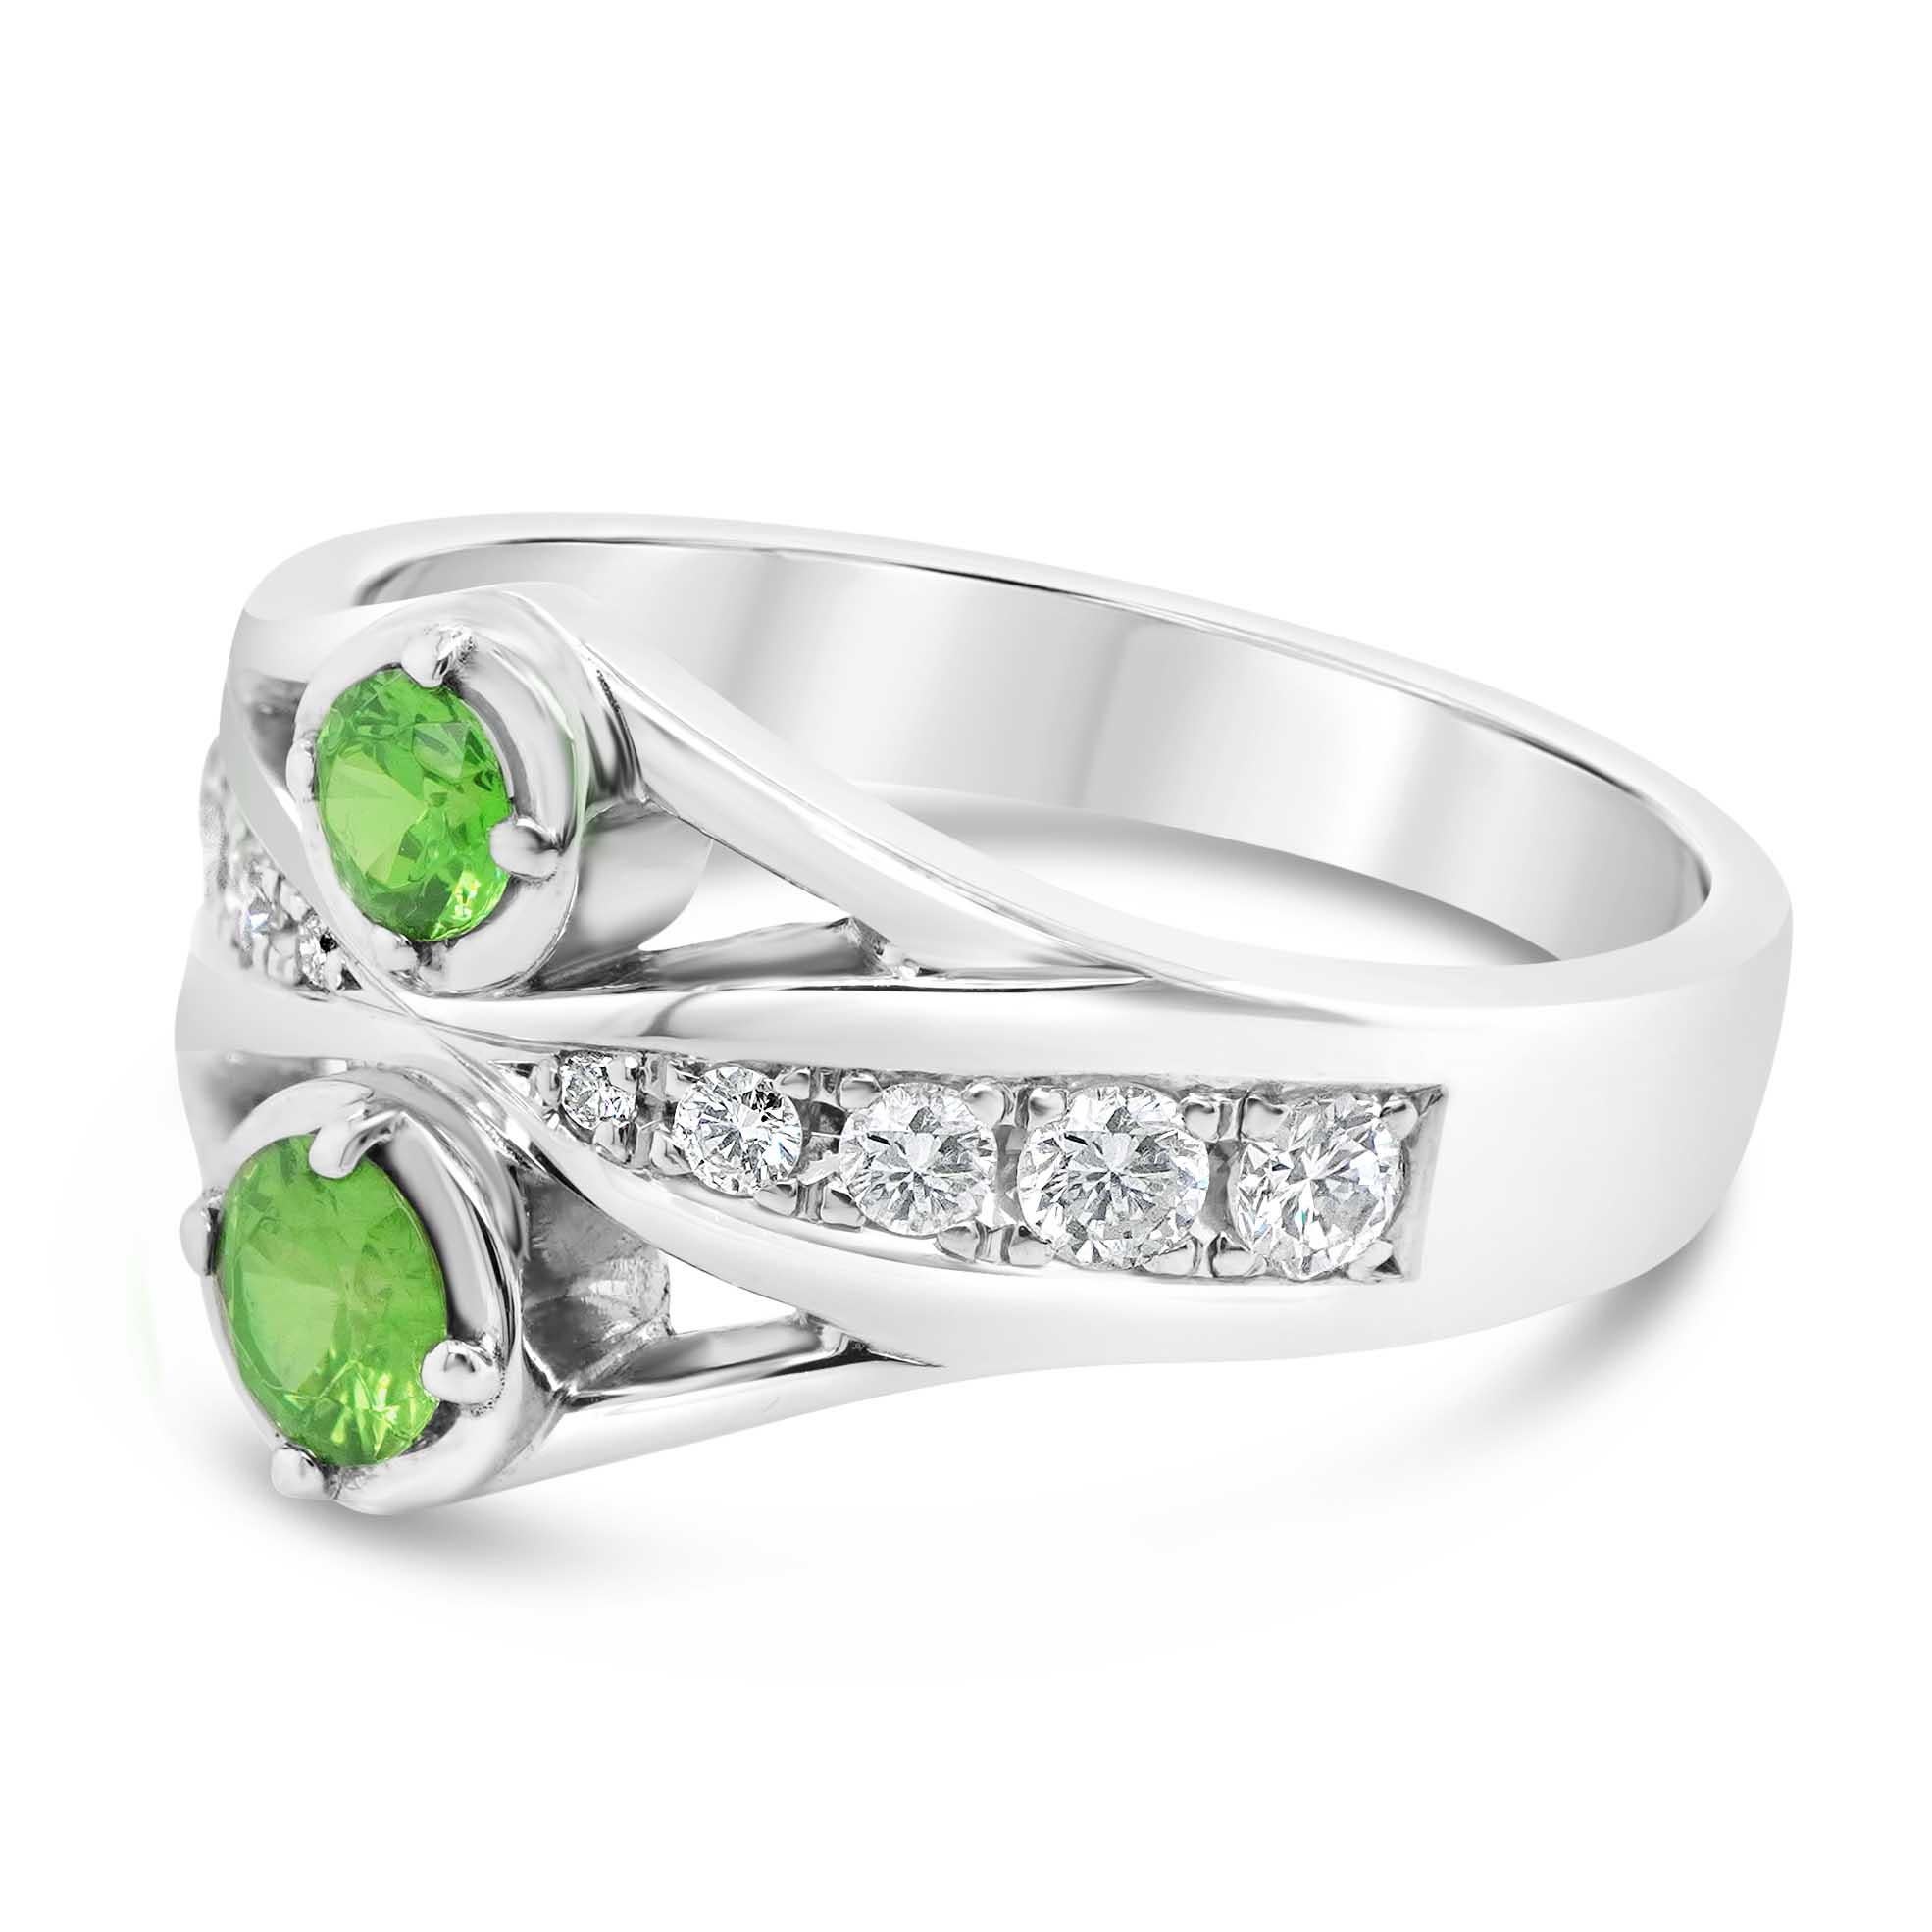 One of the rarest garnet varieties, Demantoid can have a green color that rivals emerald and a fire that exceeds diamond. Demantoids are highly prized by both gem collectors and jewelry enthusiasts. Demantoid is derived from the Dutch word for